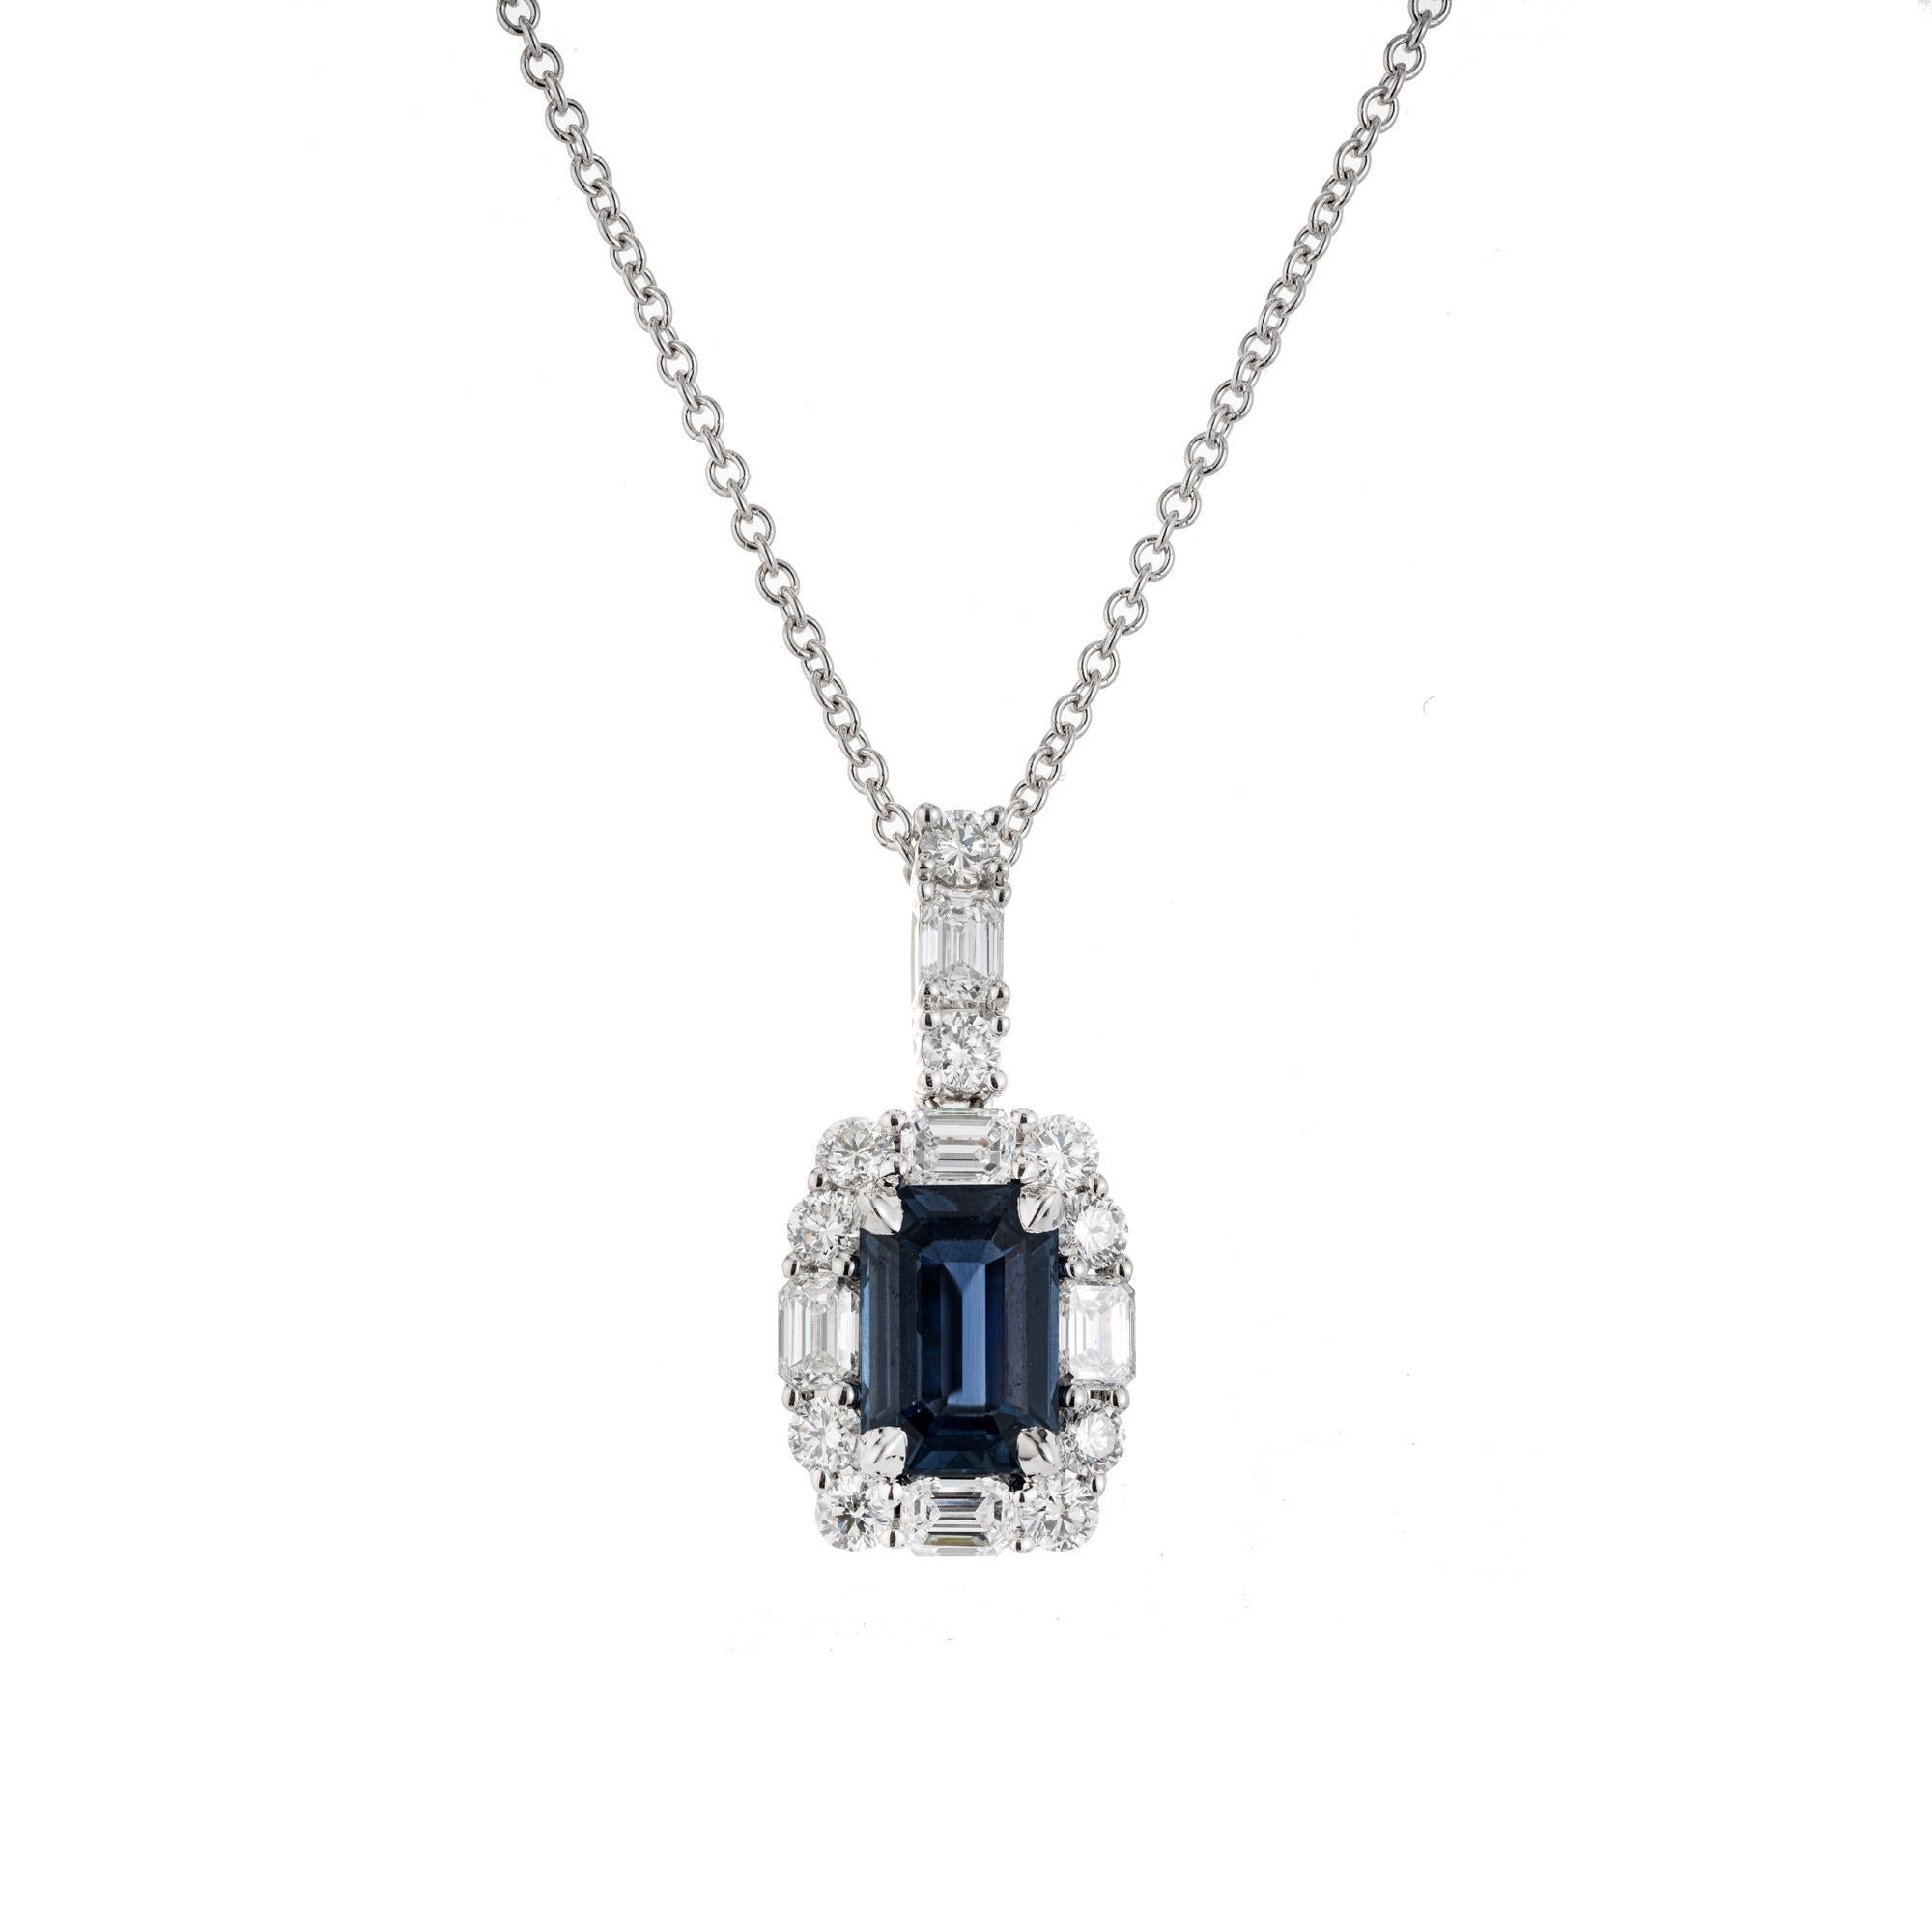 Sapphire and diamond pendant necklace. GIA certified emerald cut blue 1.63 carat sapphire. Set in a 14k white gold setting, accented with a halo of round and emerald cut diamonds along with diamonds on the bail. Art Deco inspired, this beautiful